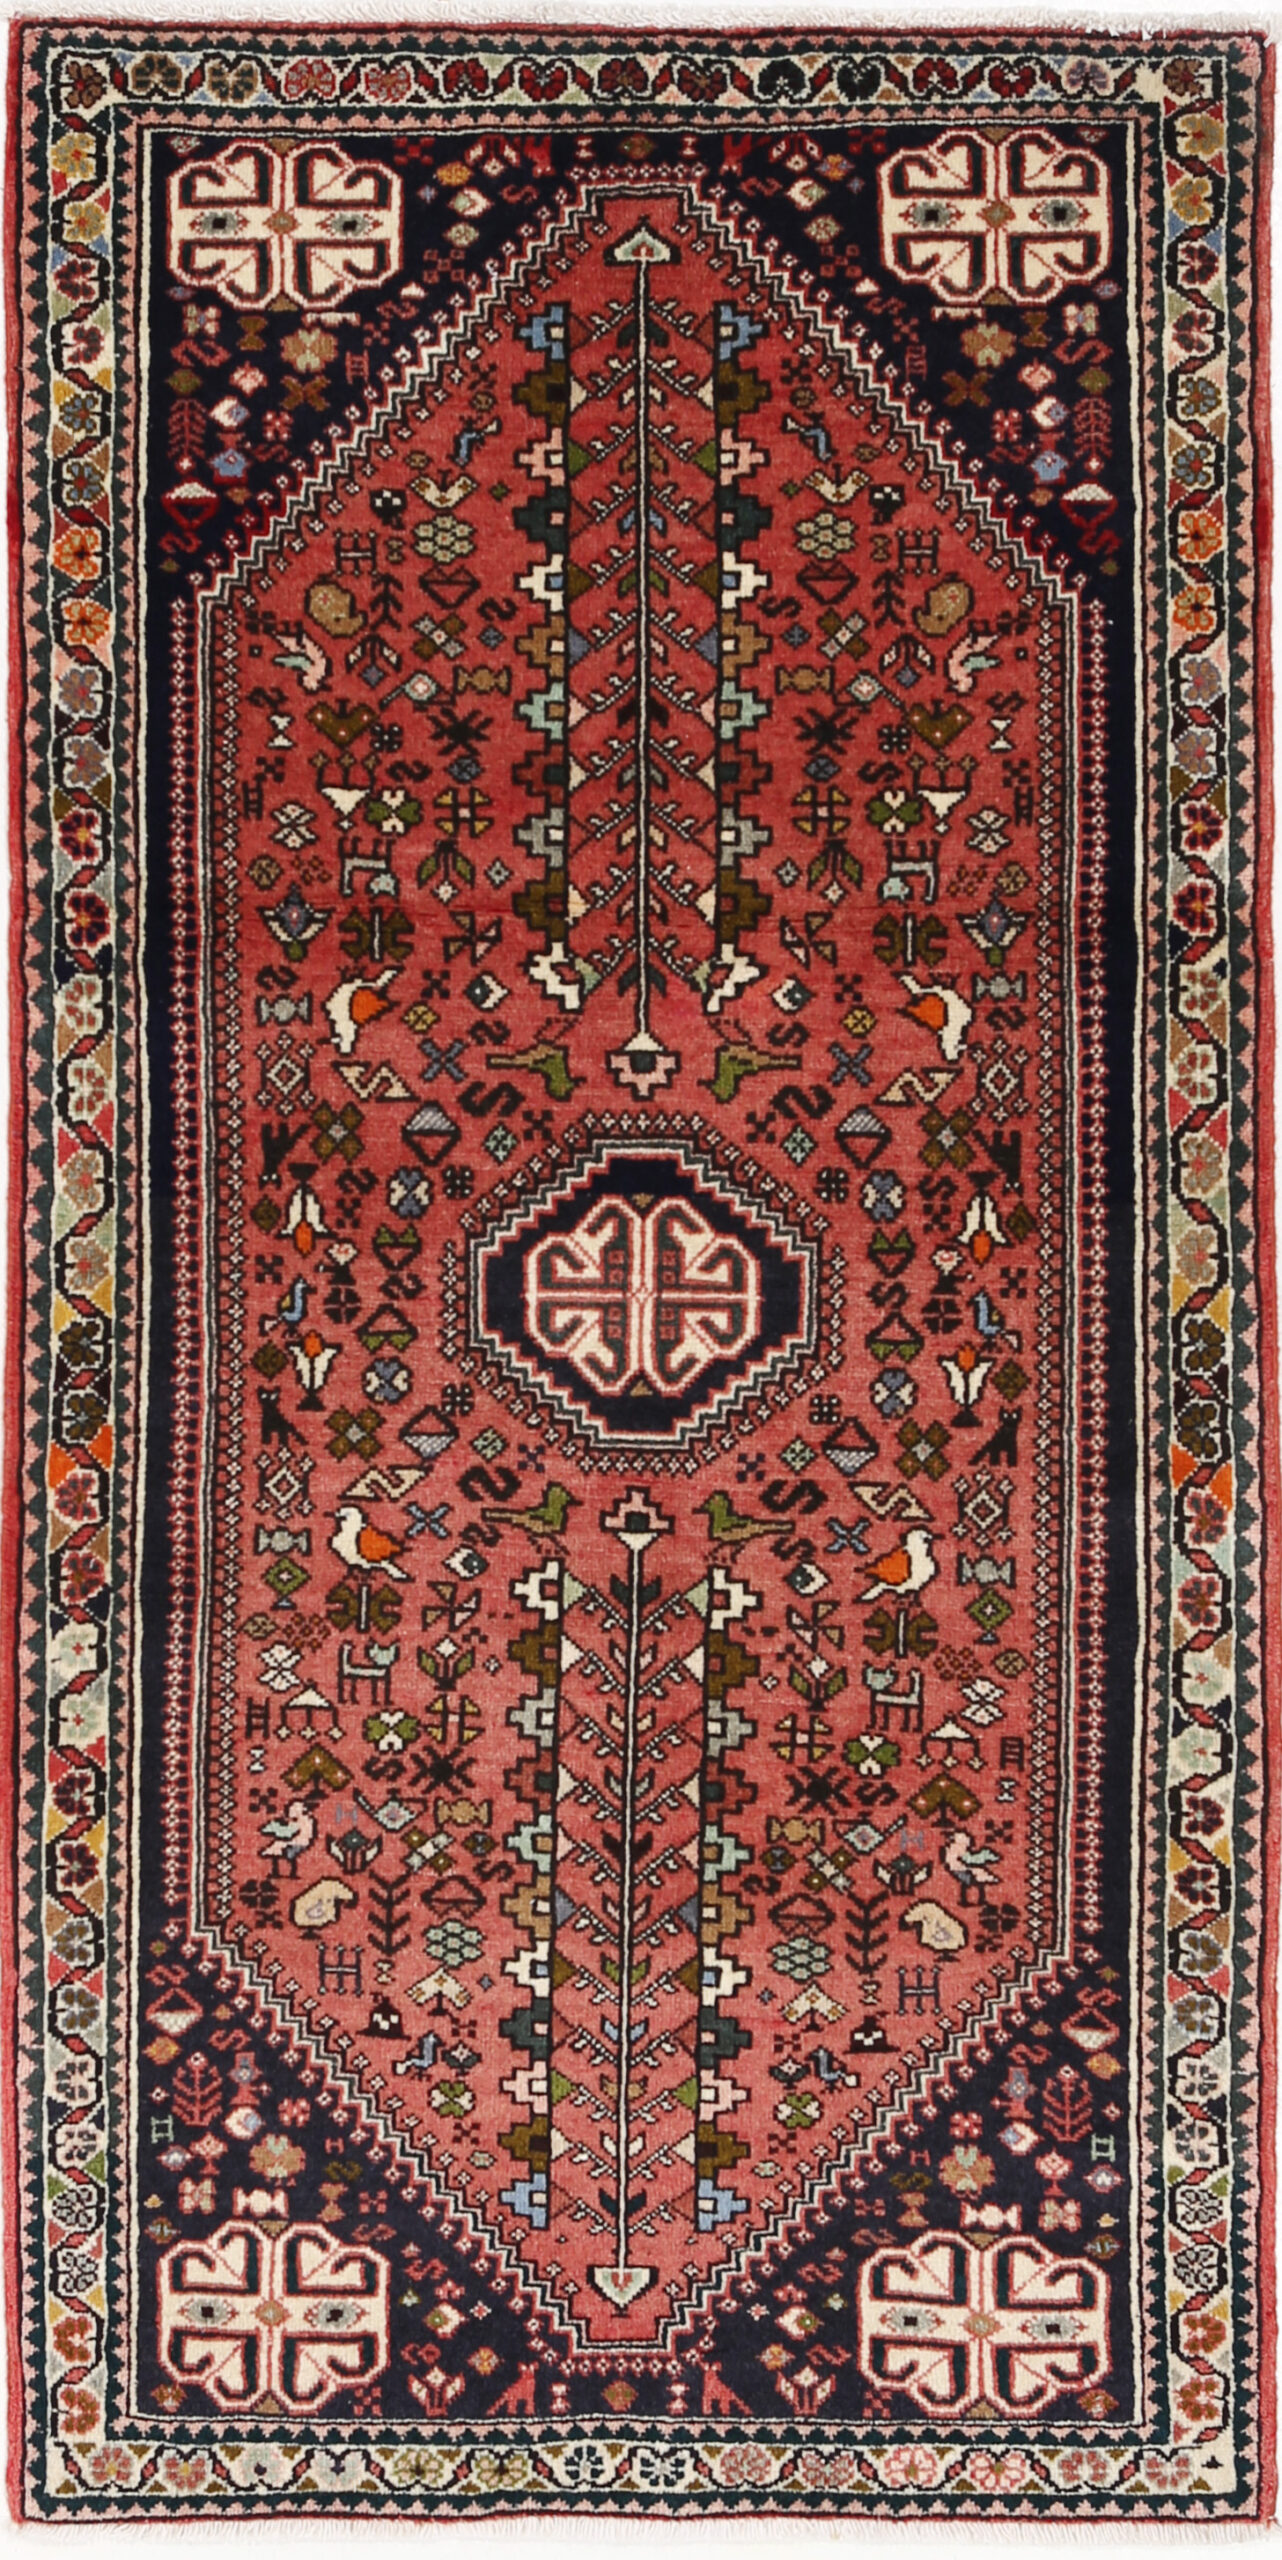 Clipping & Shaving of an Antique Caucasian Rug at Carpet Culture 